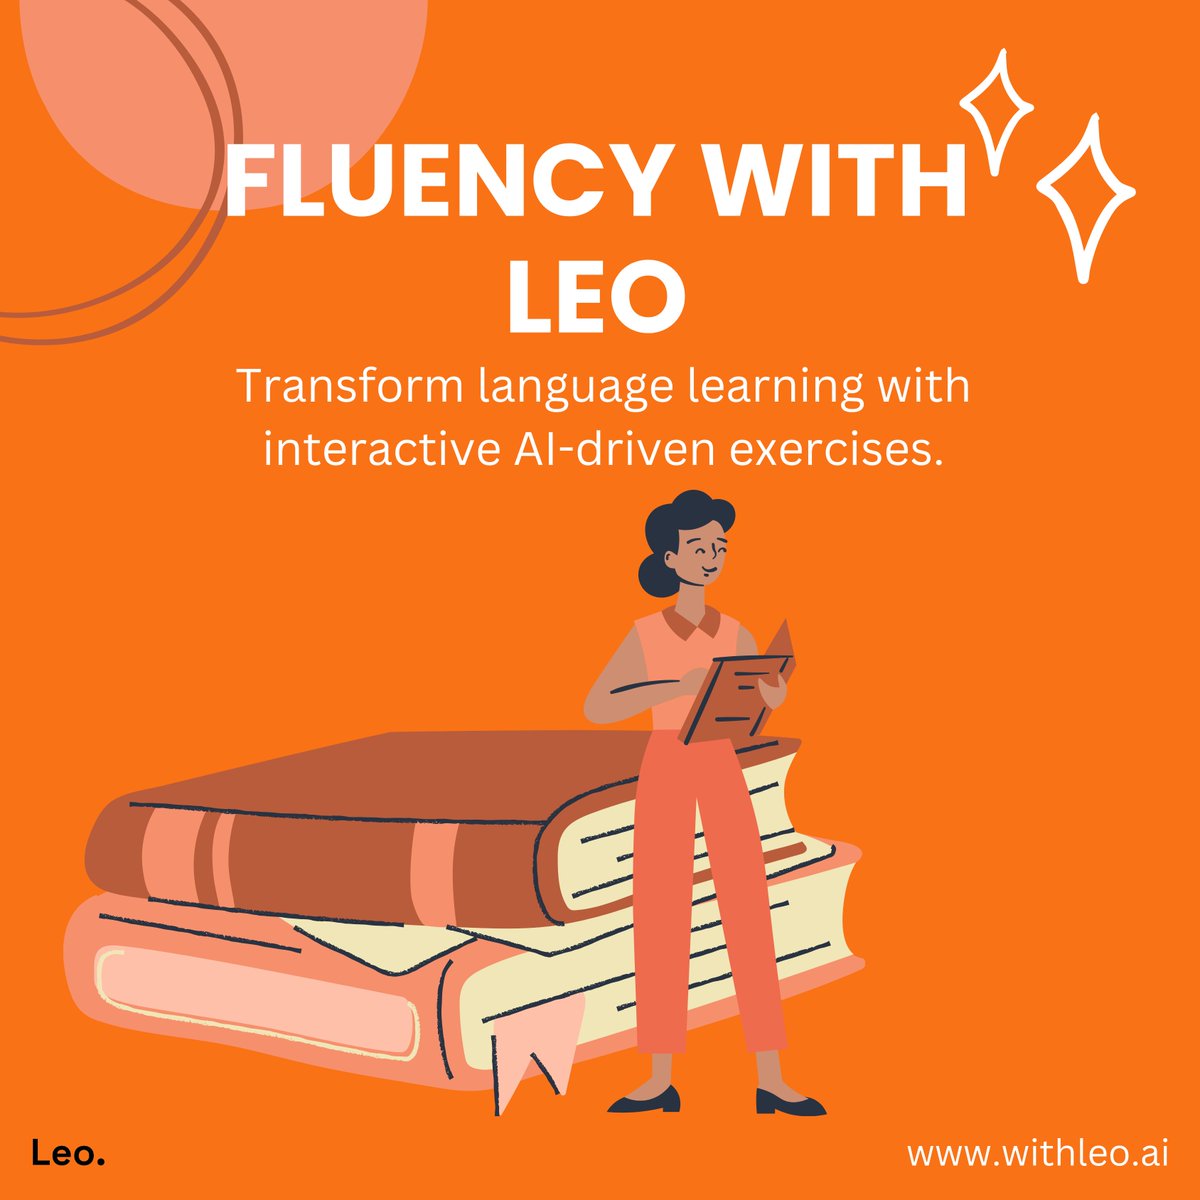 Leo: an AI-driven language learning platform, tailoring exercises for students and providing instant feedback, transforming the classroom experience. 🌍 Explore at withleo.ai #AI #edtech #education #teaching #AIinEducation #TeacherTools #TeachingAssistants